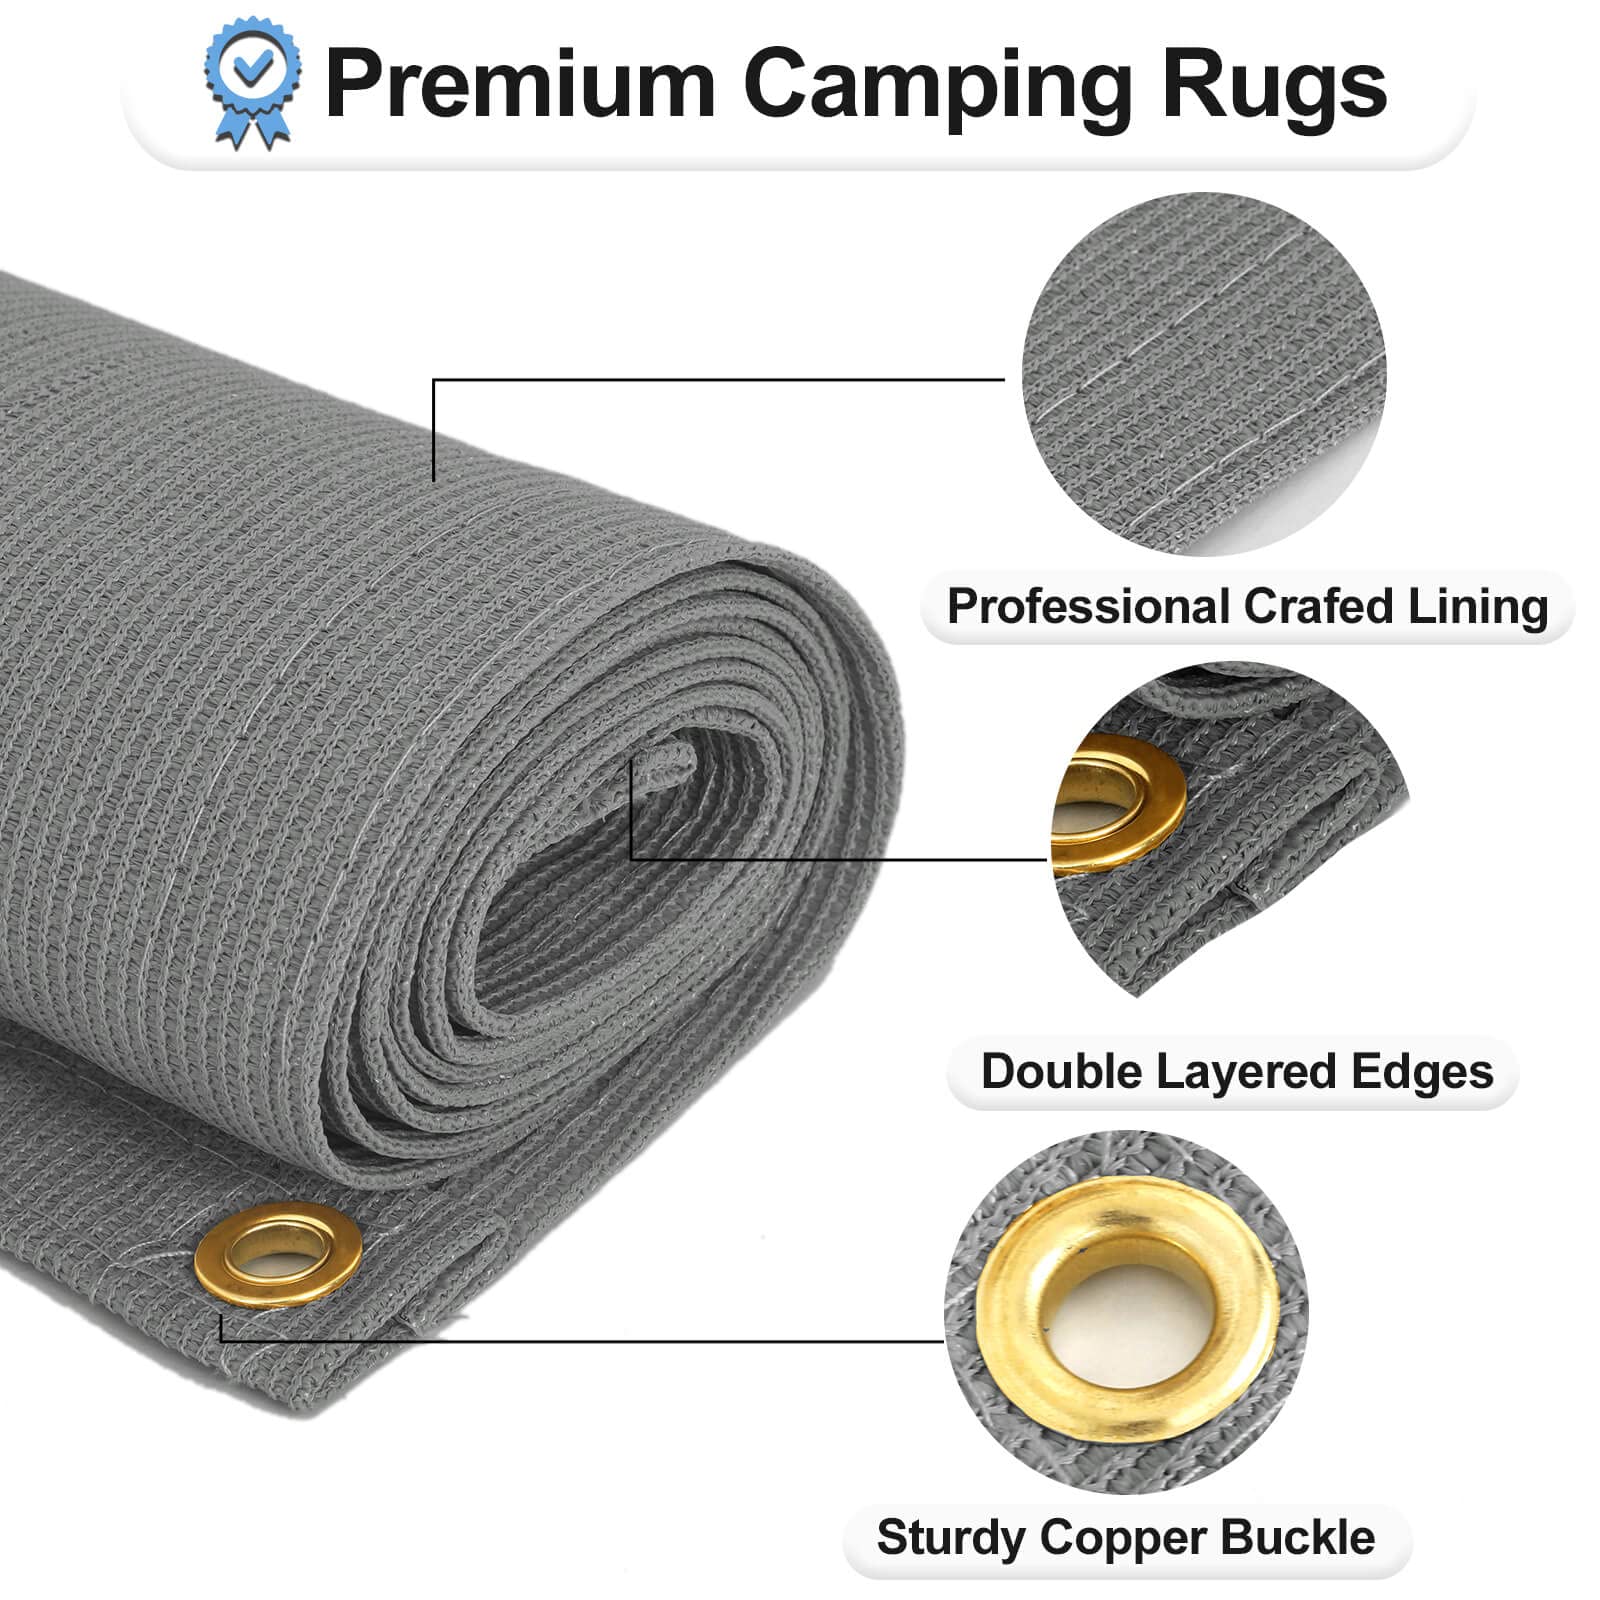 OutdoorLines Portable Tarp Outdoor Rugs for Patio 8 x 10 ft - UV and Weather Resistant Patio Carpet, Stain Resistant Plastic RV Camping Mats for Porch, Garden, Camper and Picnic, Gray